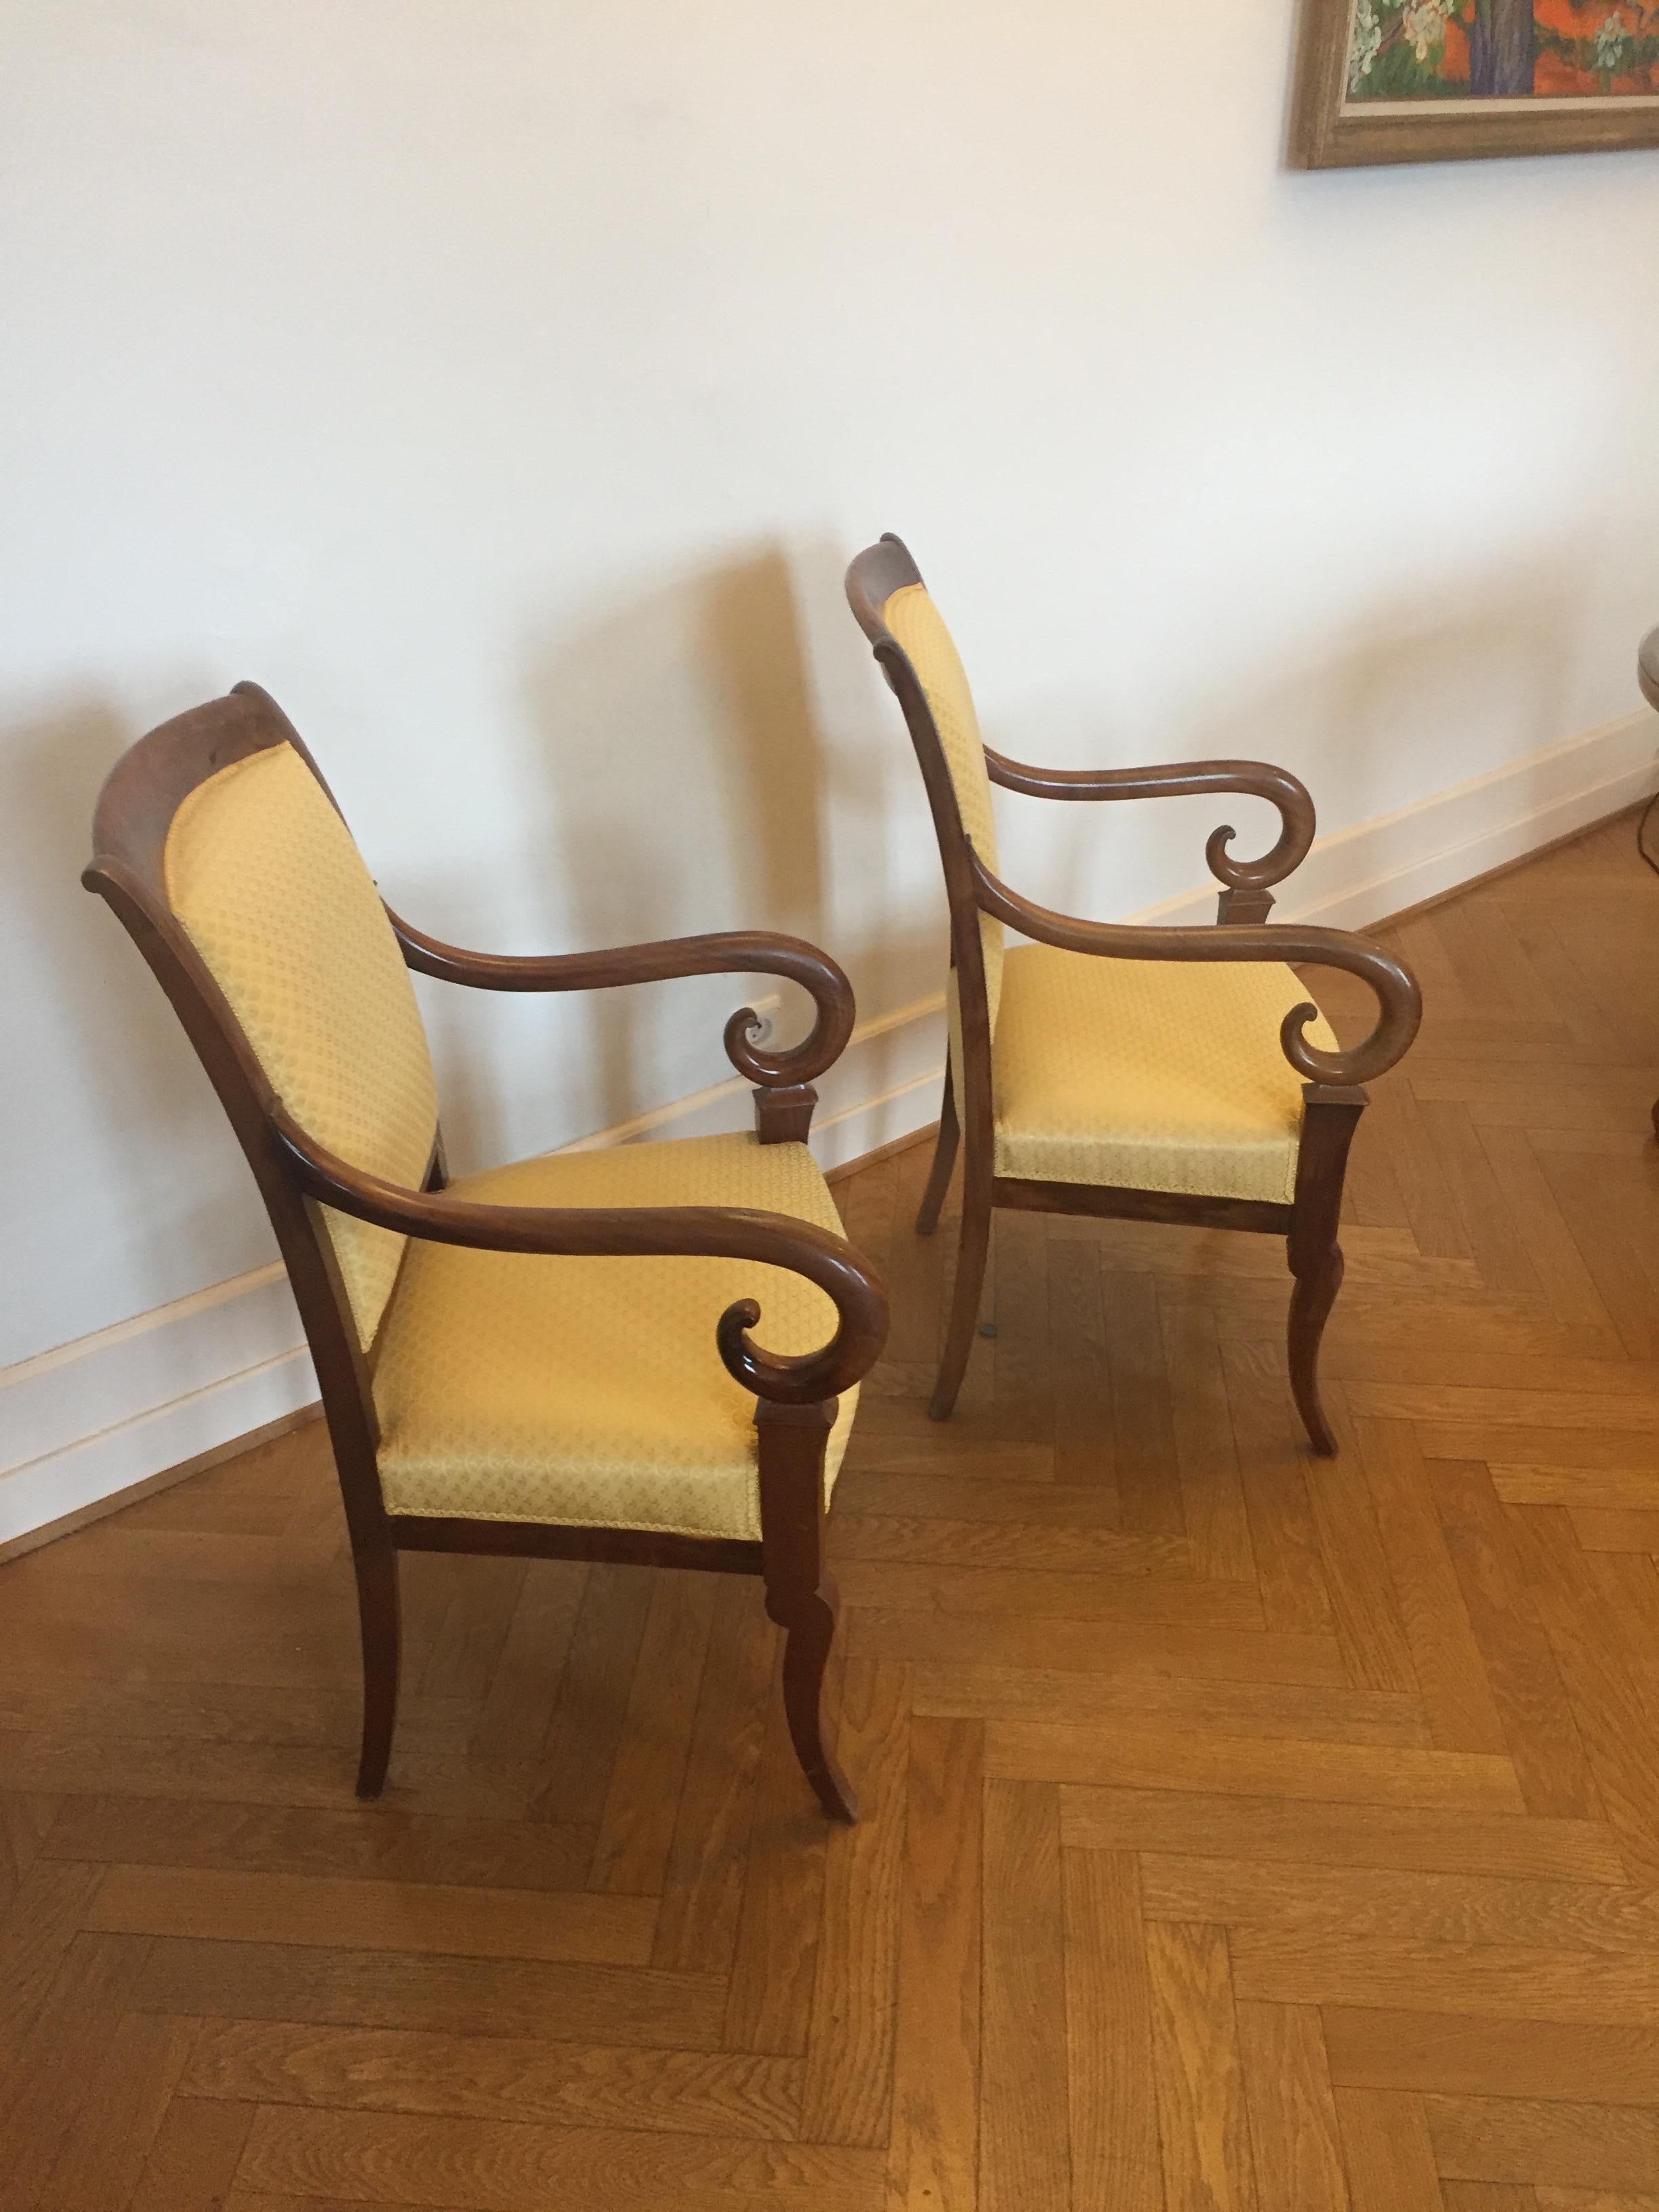 Pair of French Louis Phillipe Mahogany Armchairs Recovered in a Yellow Fabric For Sale 4